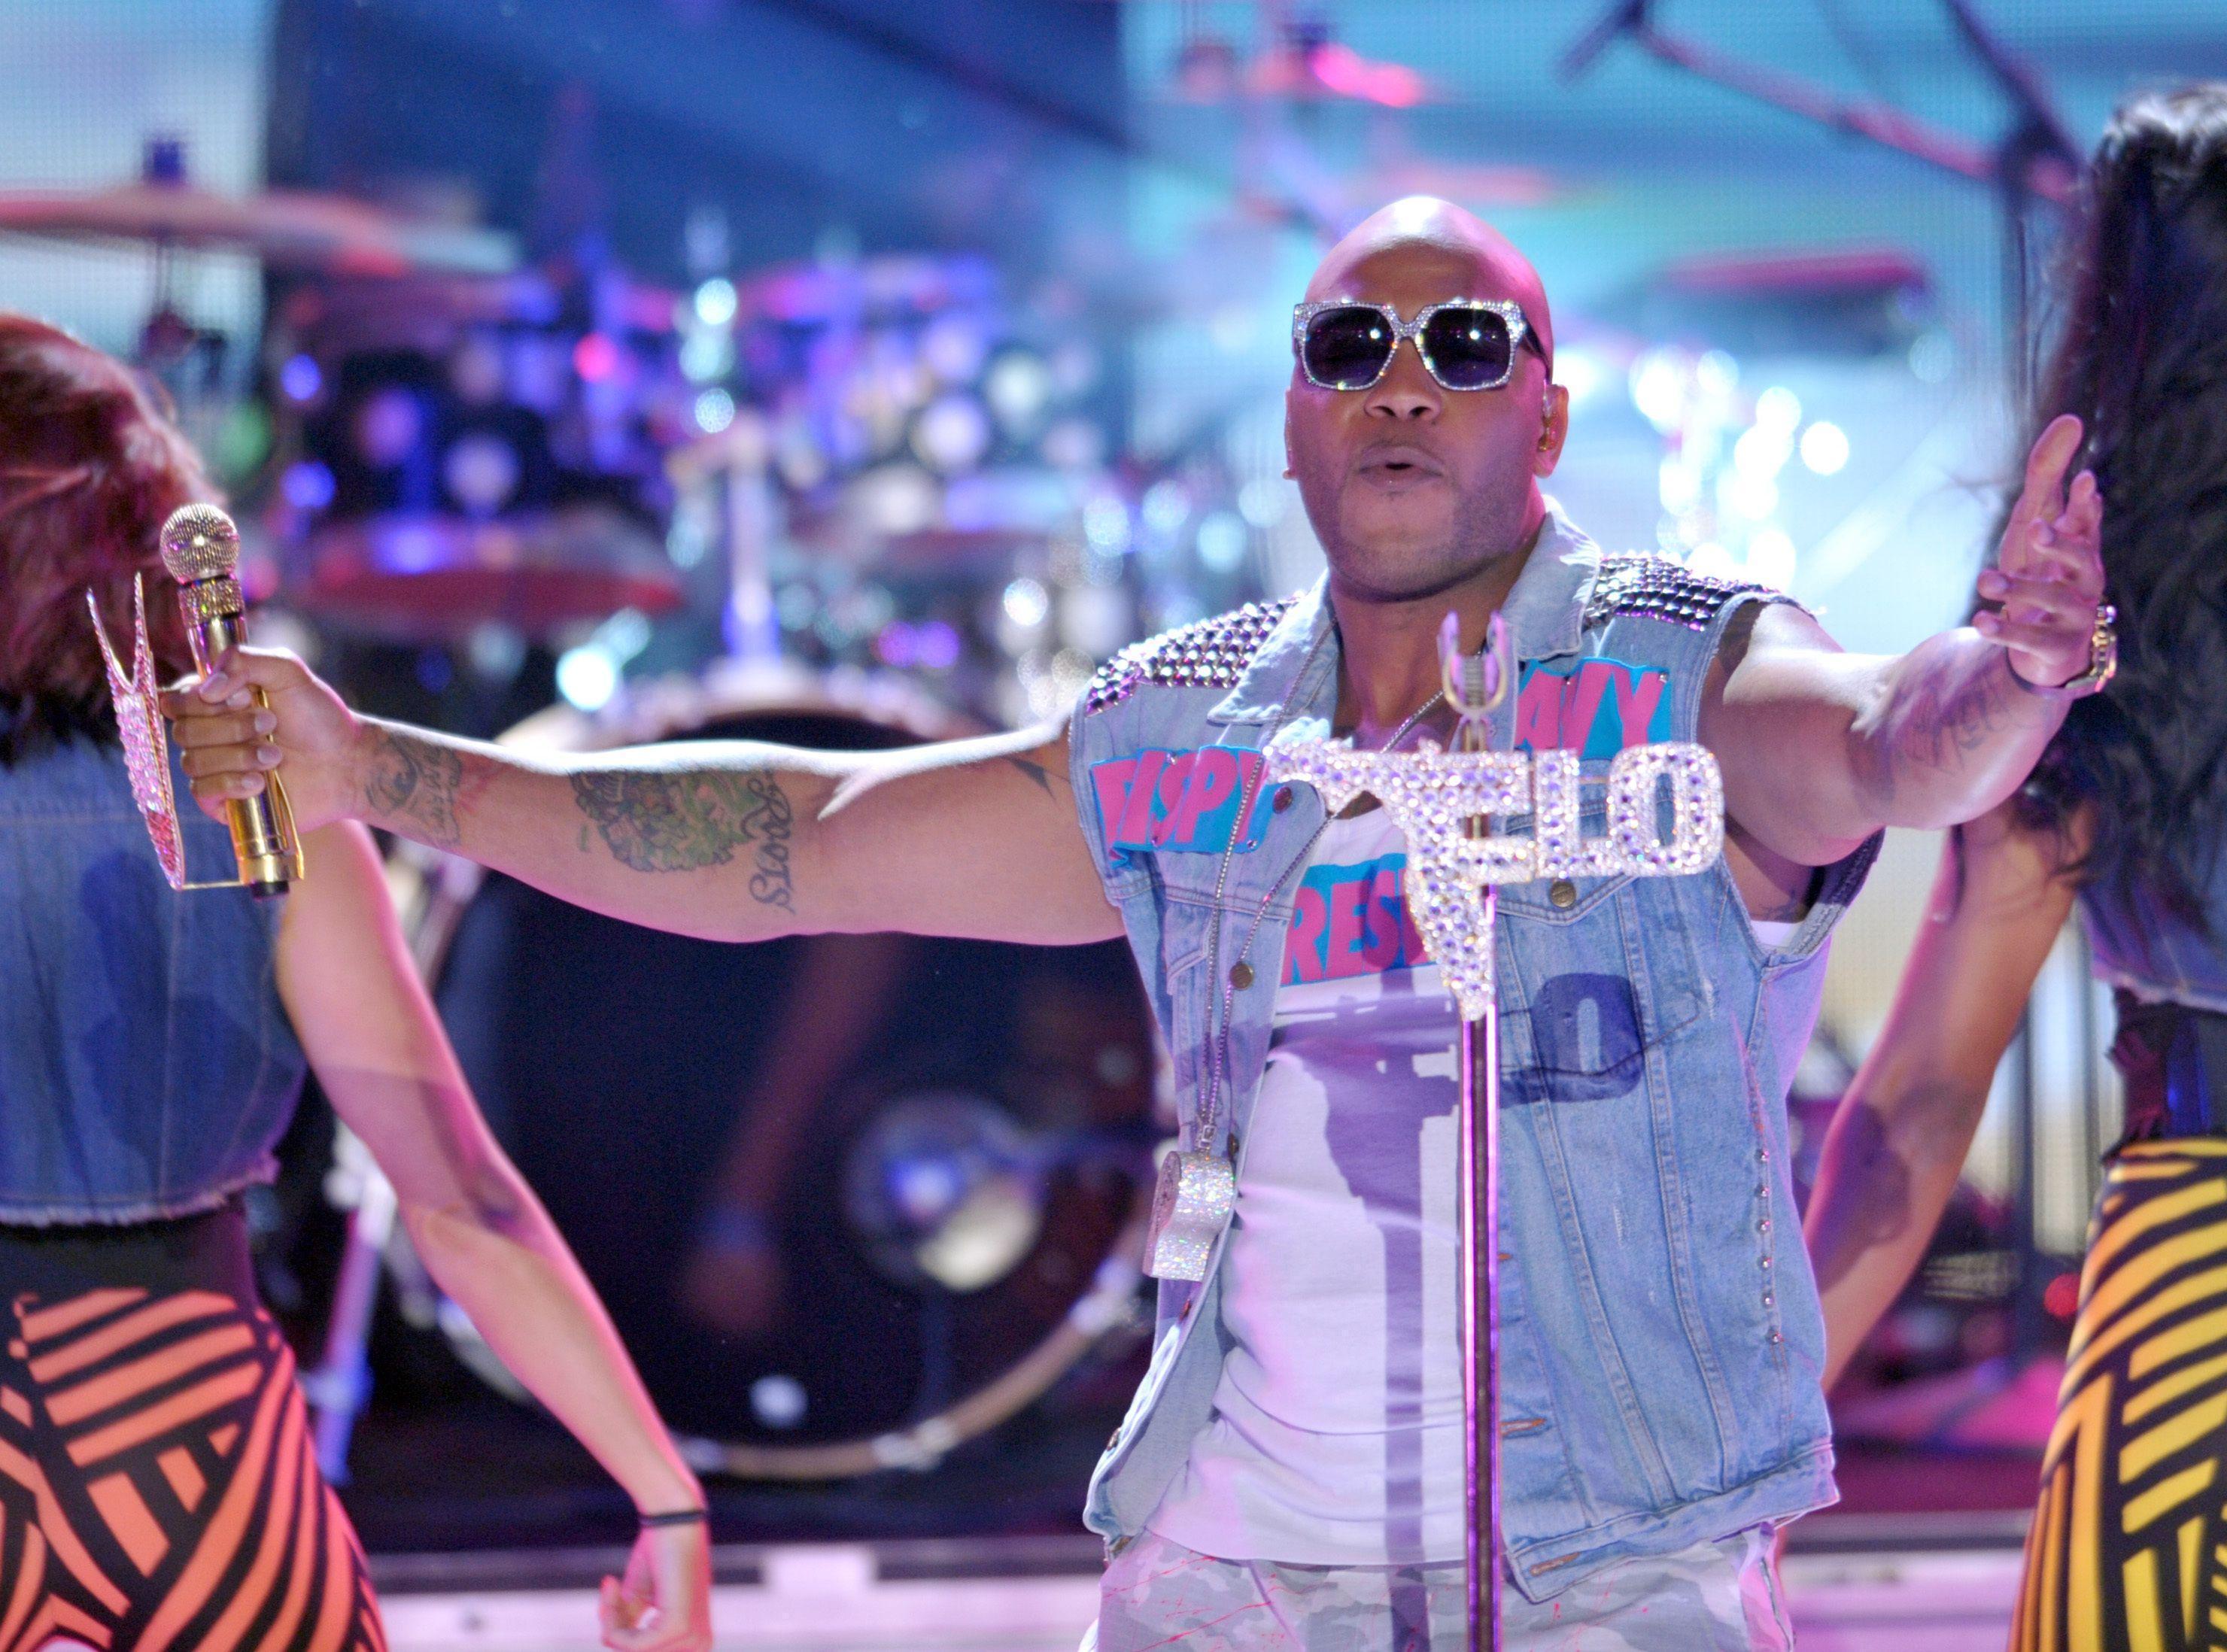 Flo Rida Wallpaper Image Photo Picture Background